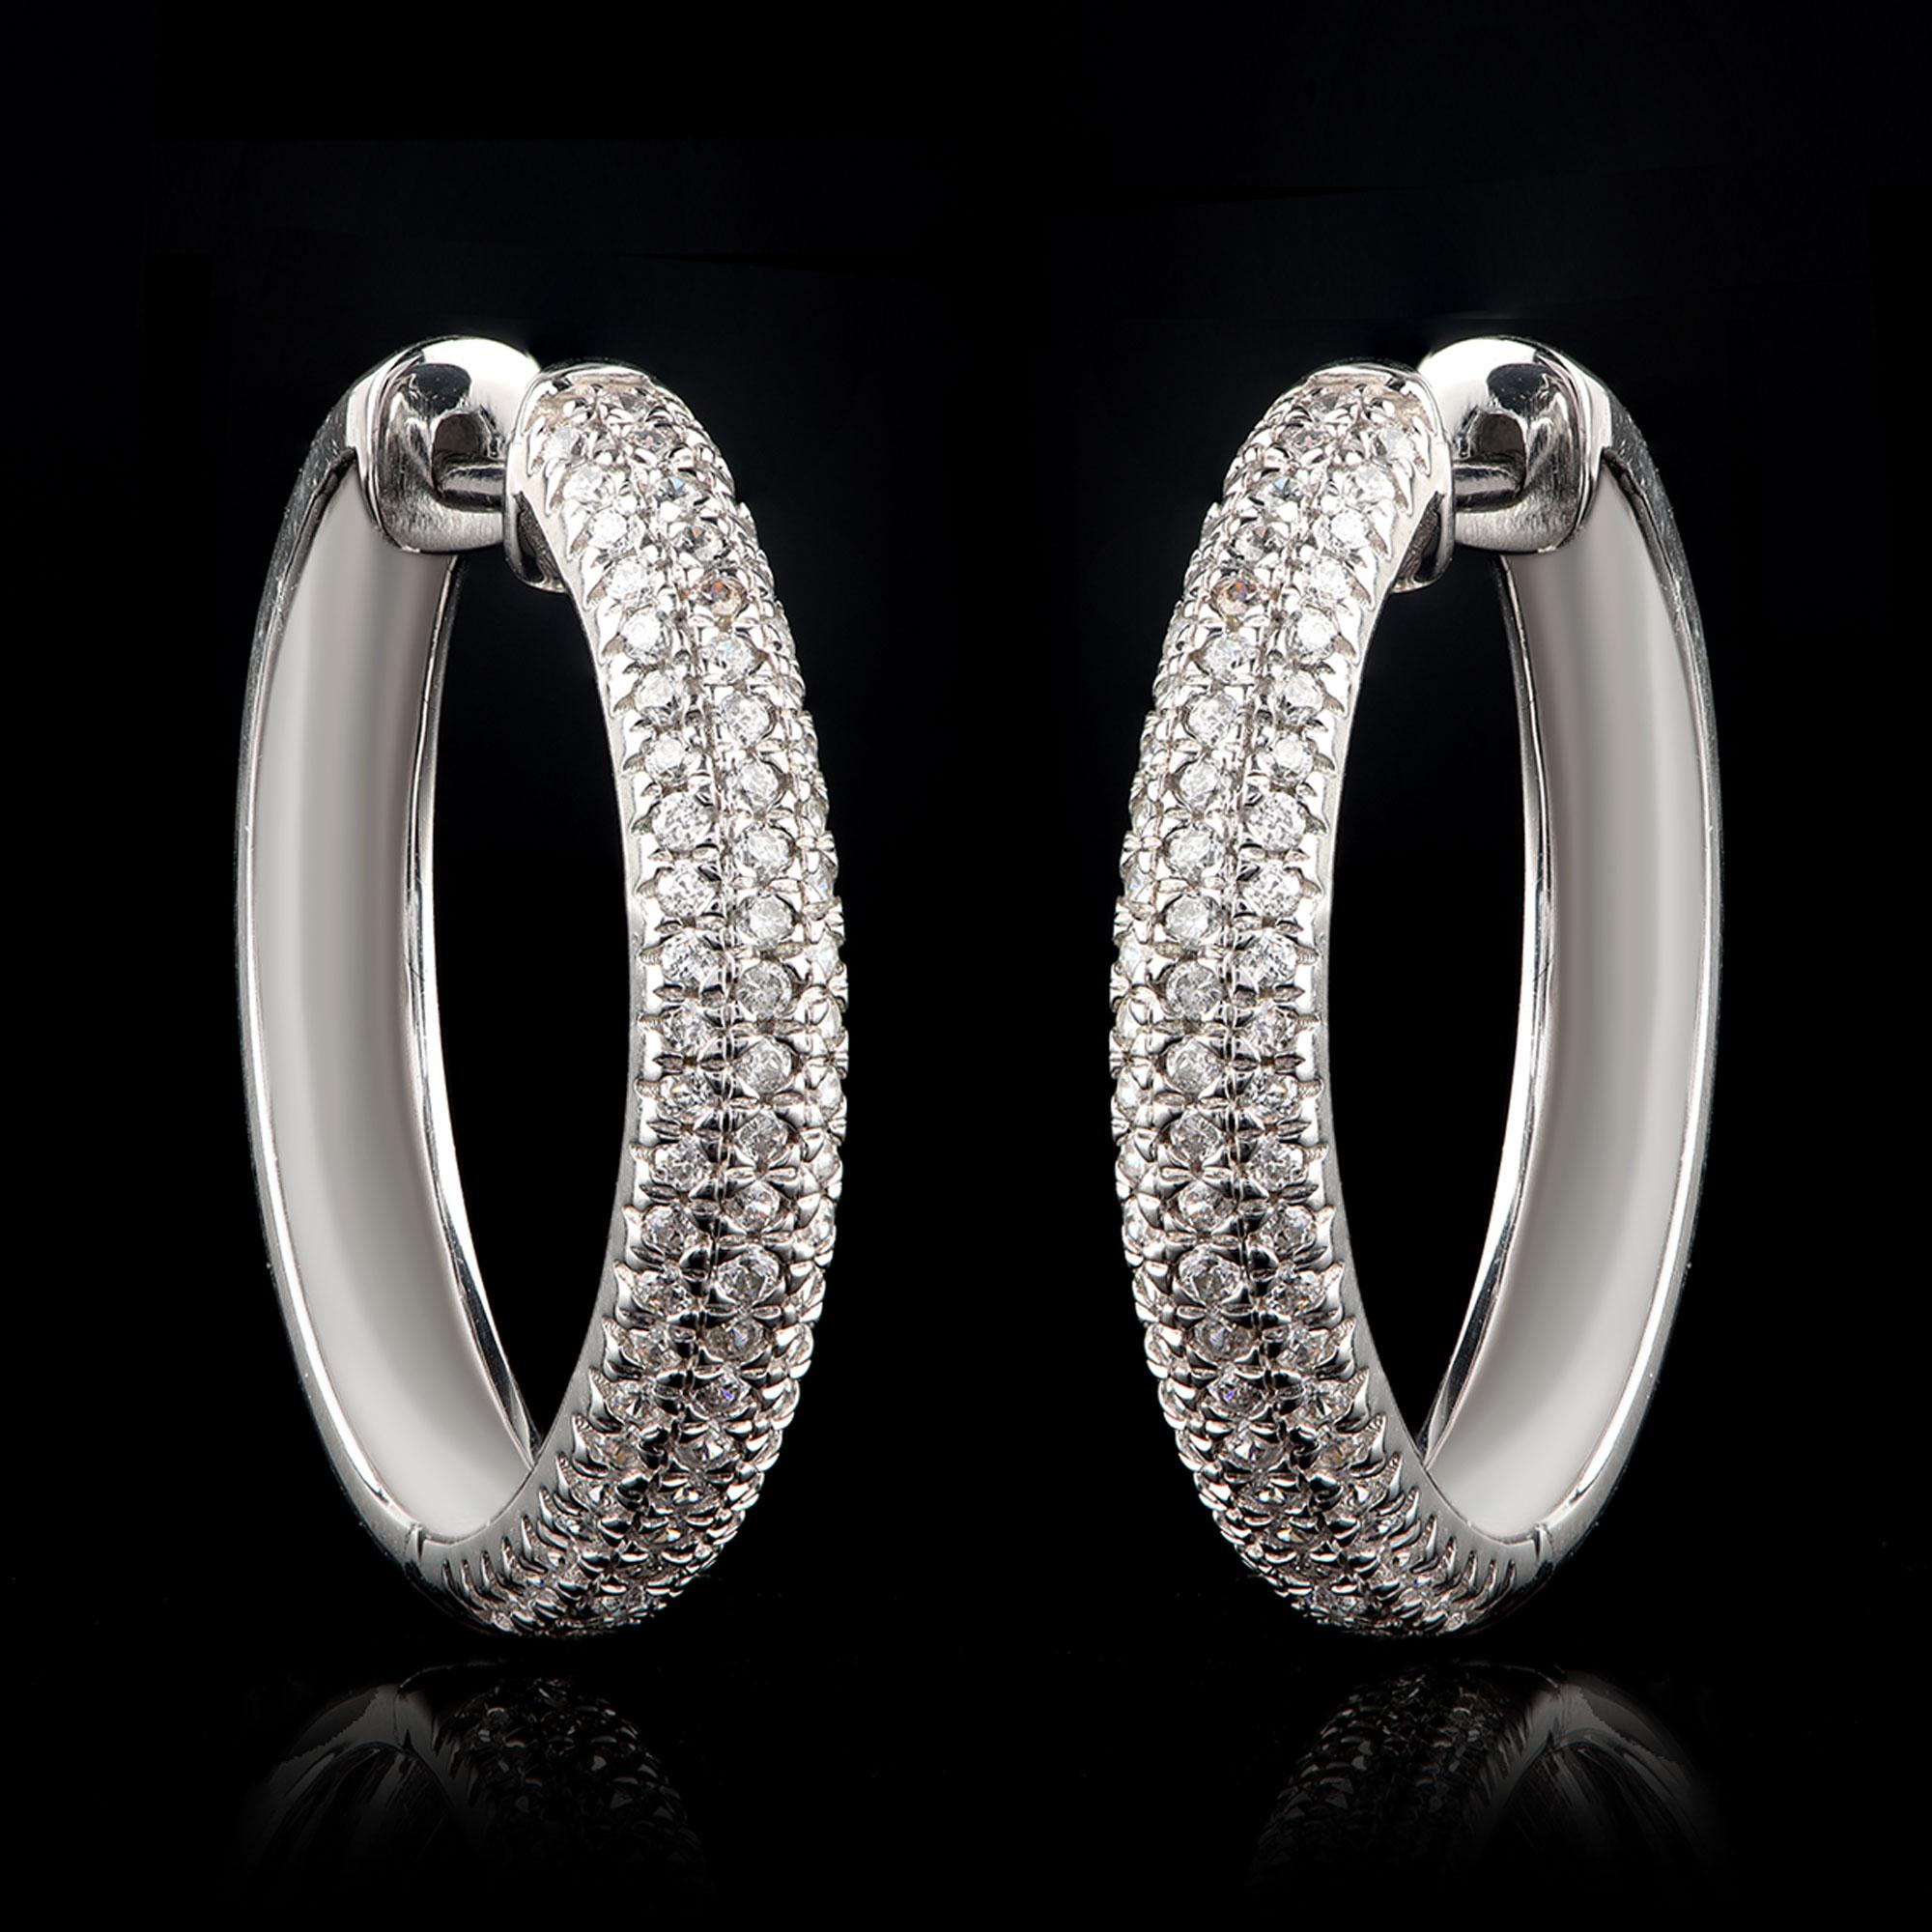 These diamond hoop earrings look truly captivating with 146 brilliant-cut diamonds in micro-pave setting and crafted in 18 KT white gold. The diamonds are graded H-I Color, I2 Clarity.